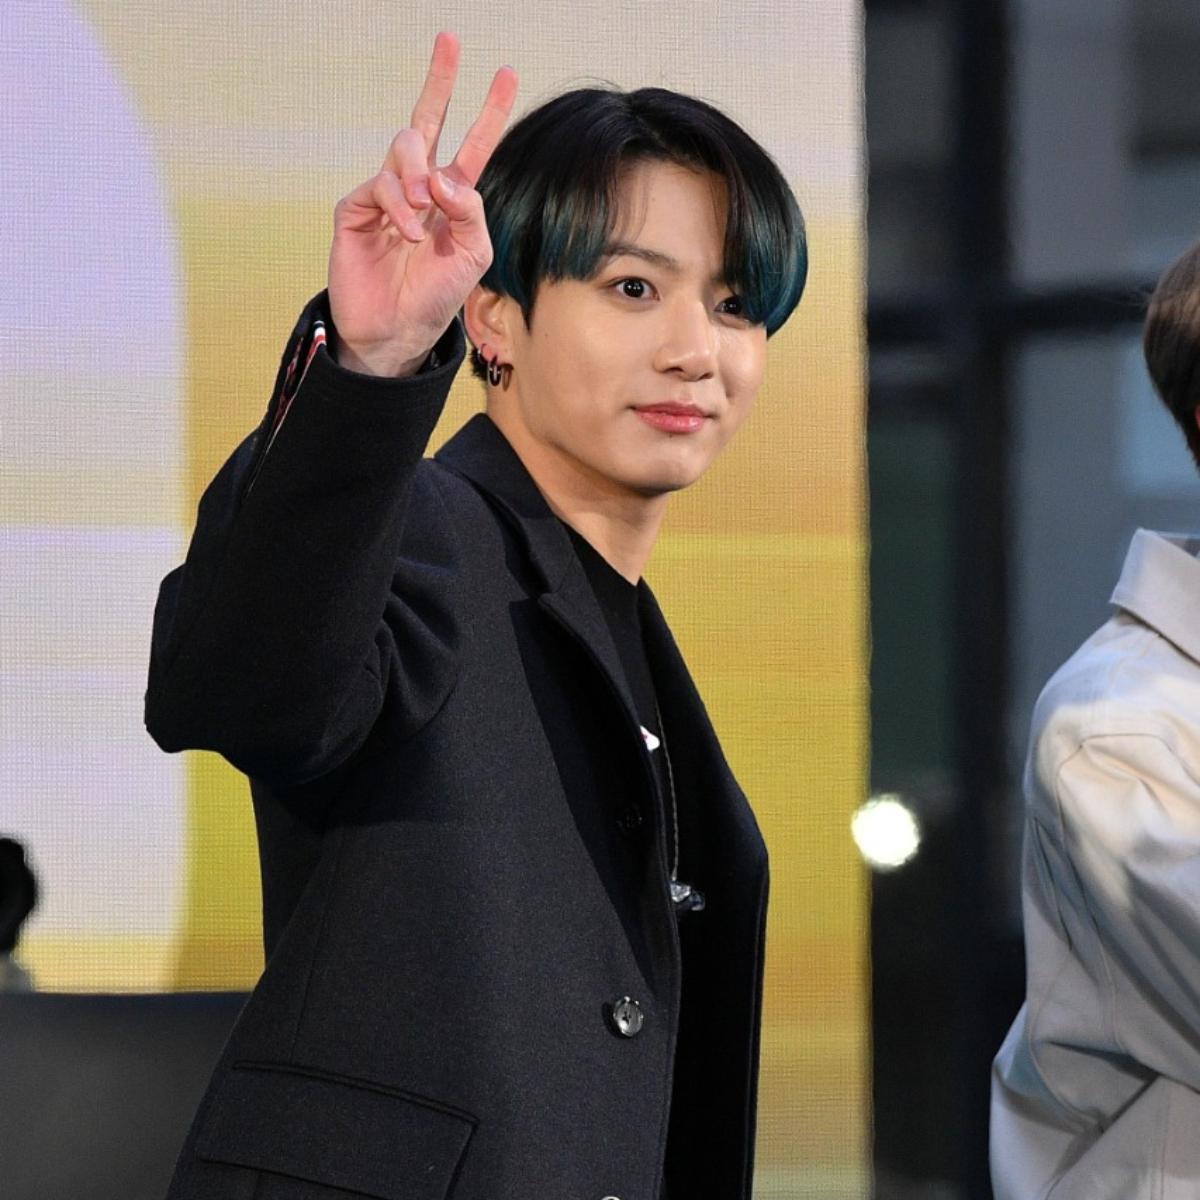 Dear Oppa: An Indian ARMY confesses that she loves BTS' Jungkook 'a little more each day' & hopes to meet him 